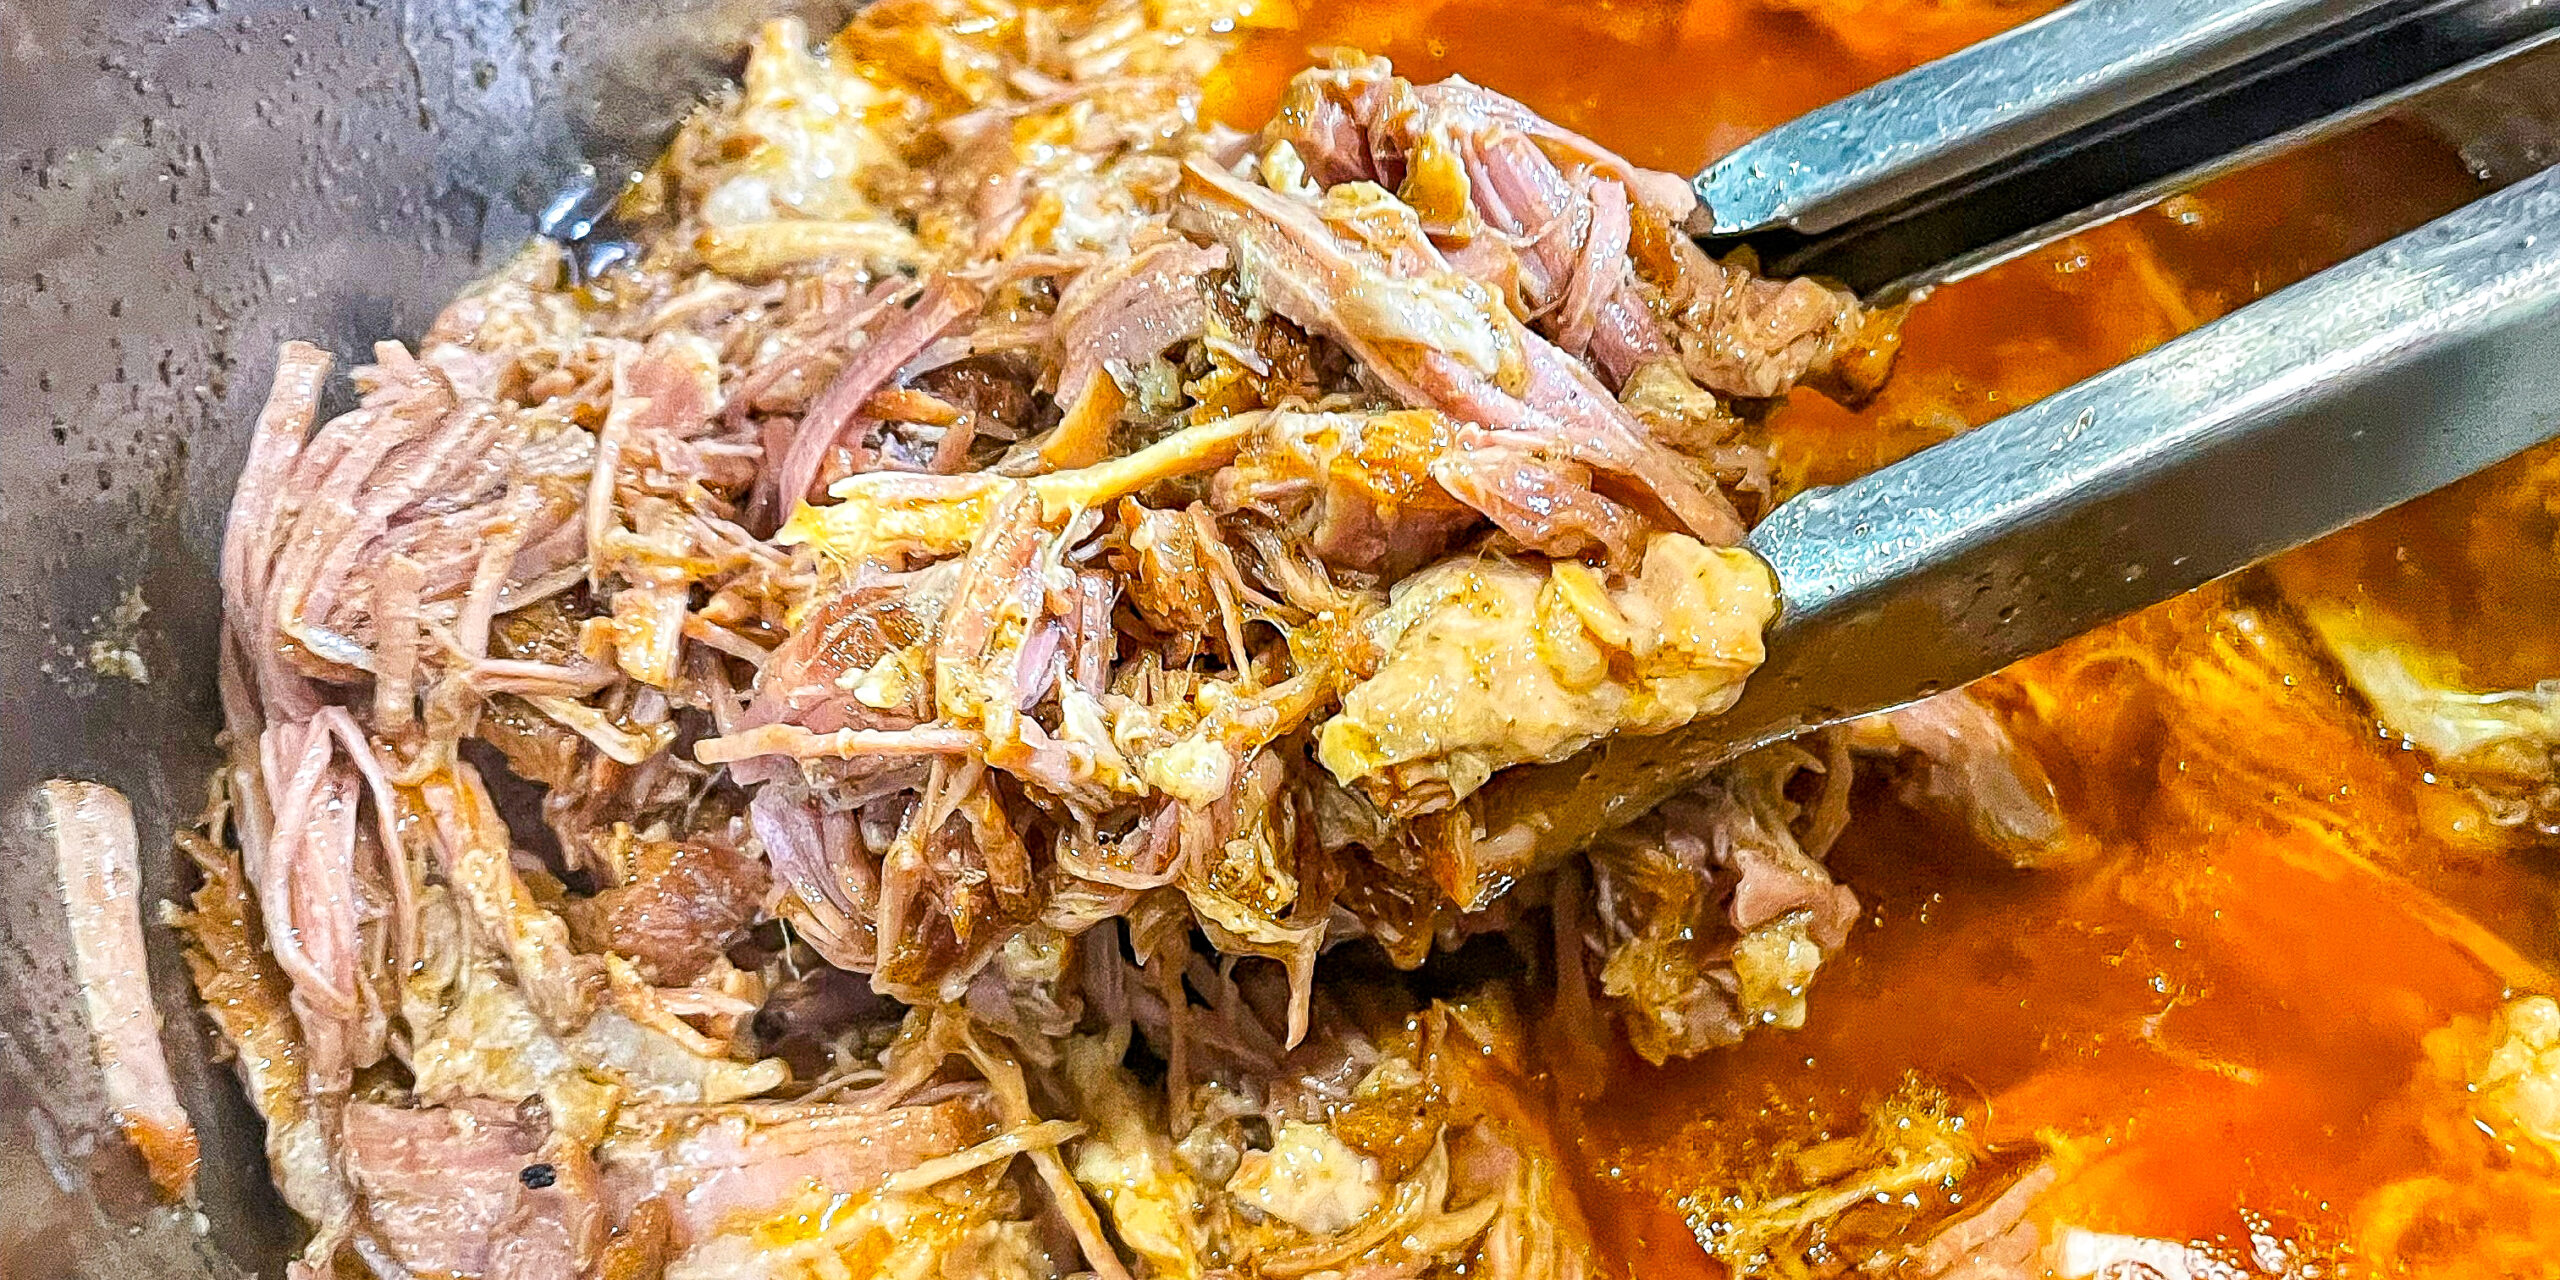 Pulled pork featured